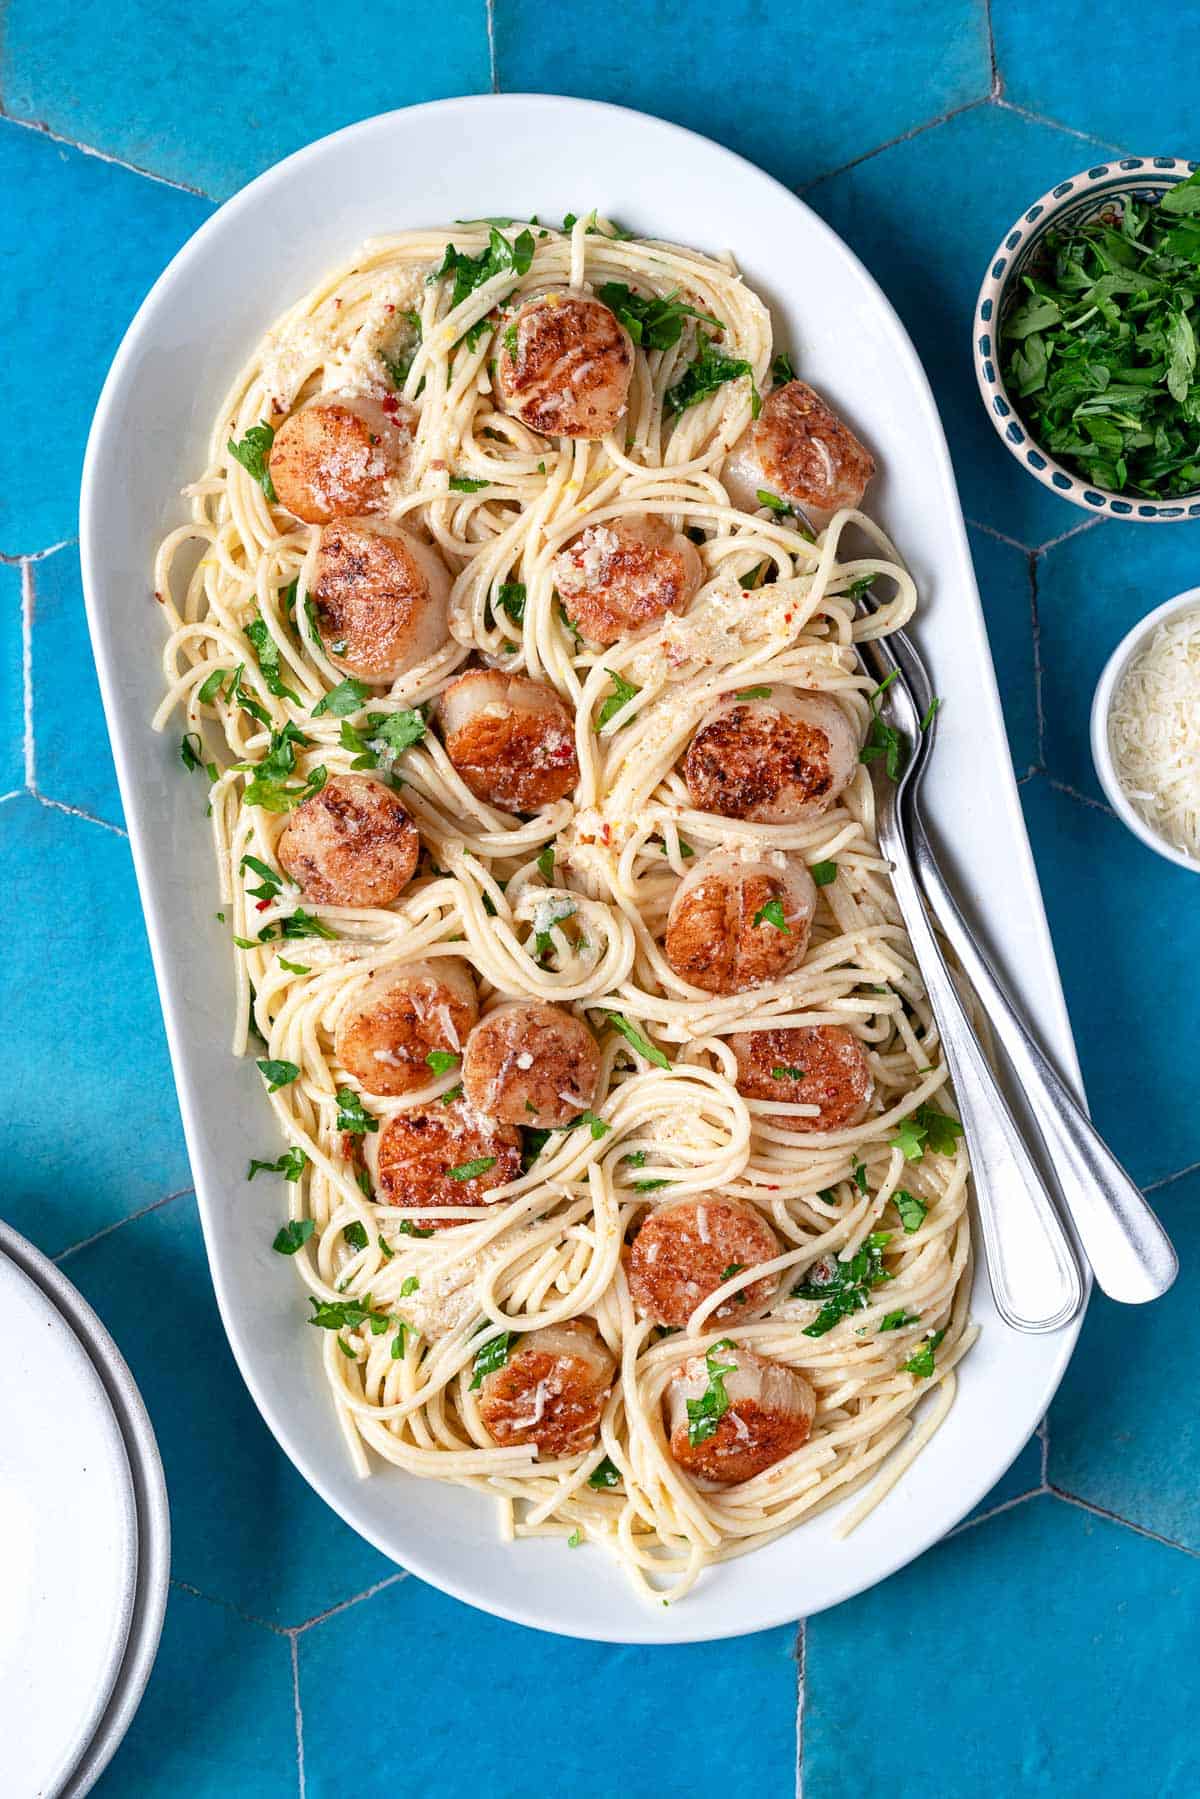 Large serving platter of scallop pasta with parsley and parmesan cheese on the side.